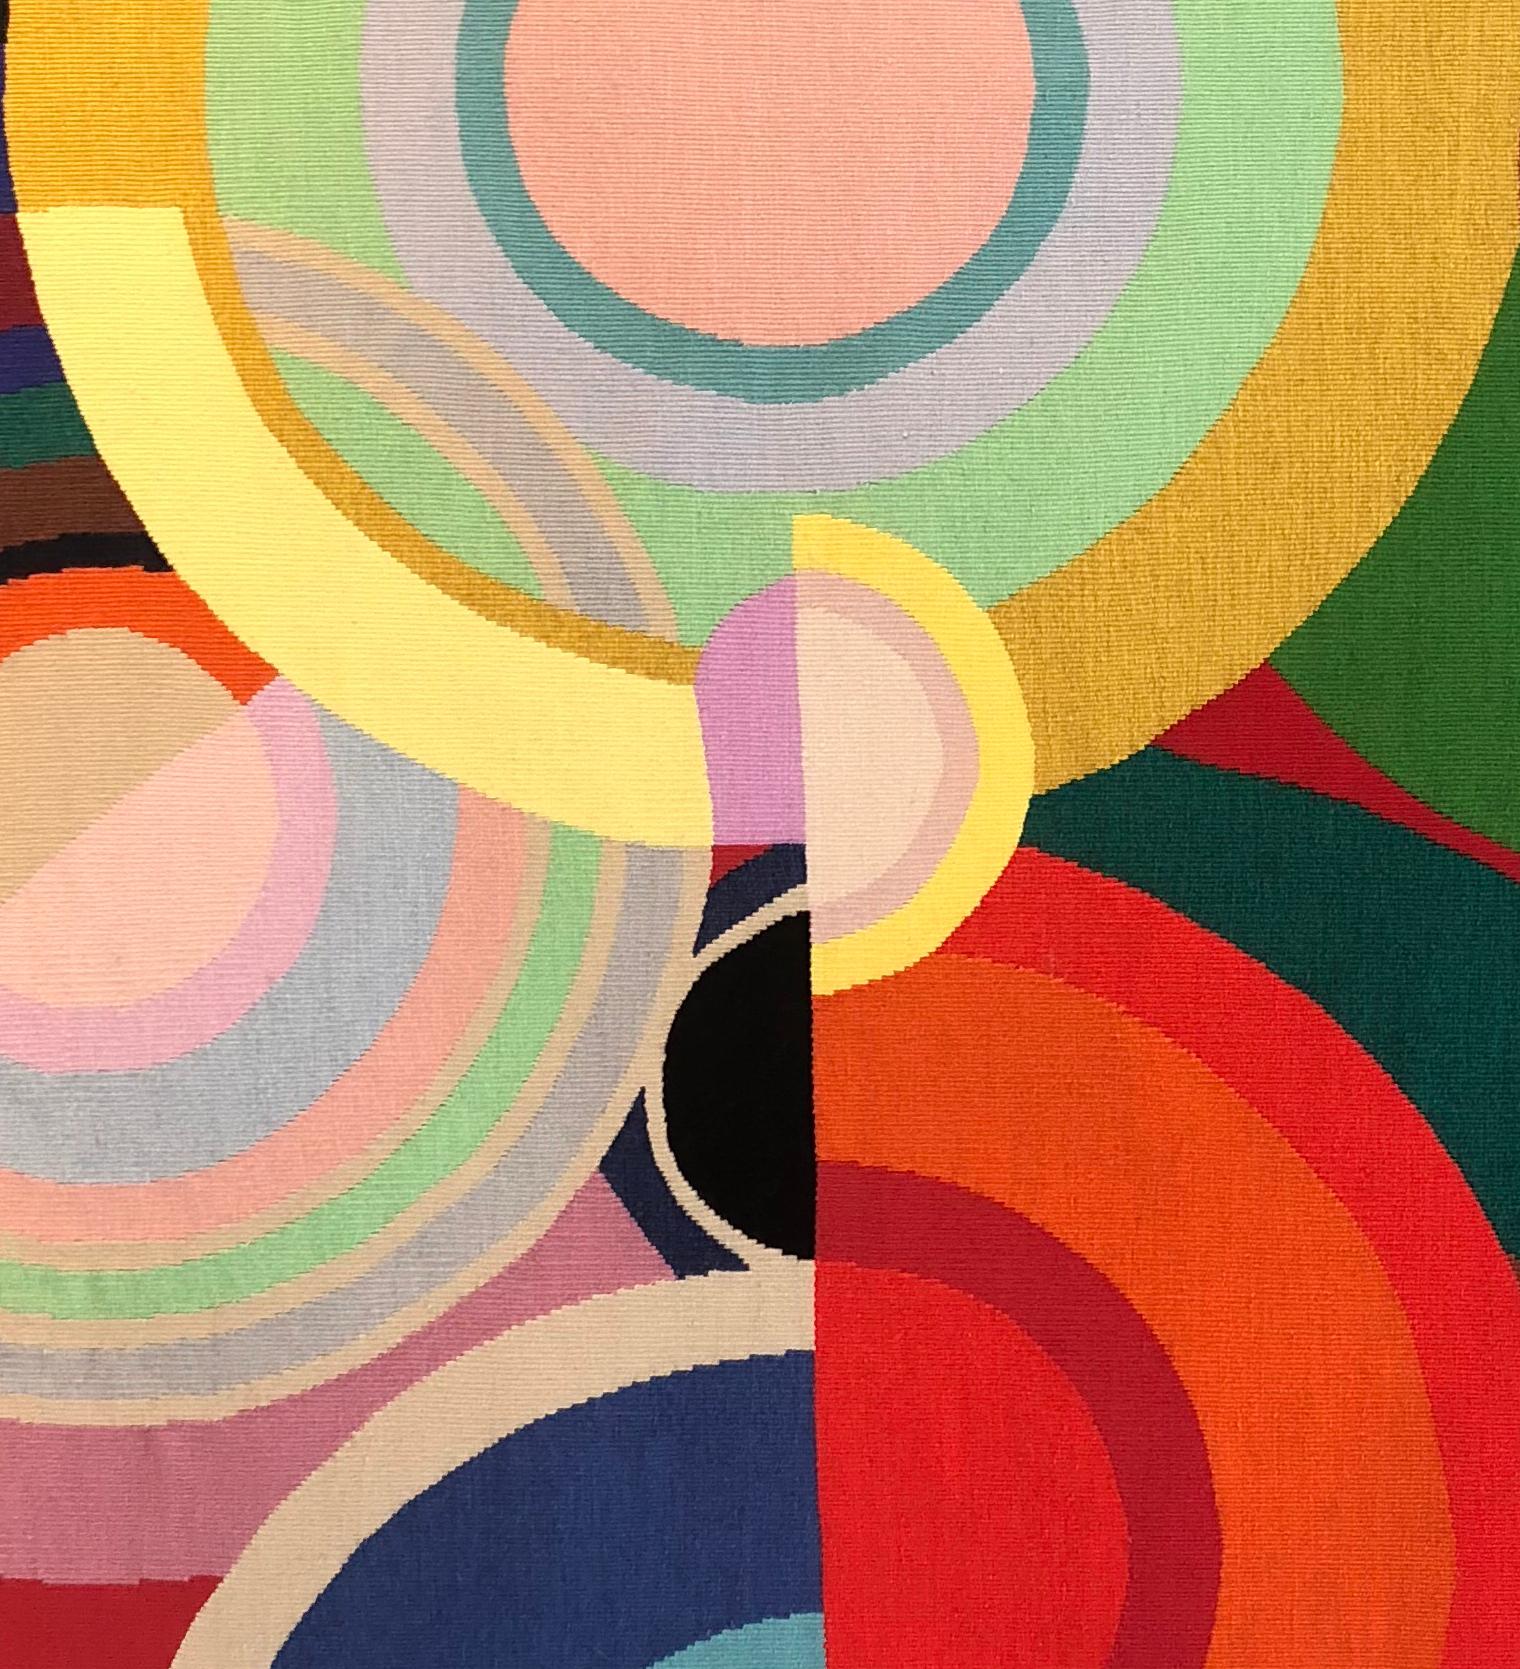 Sonia Delaunay, Automne, 1970

The artist's name and the monogram for the ateliers woven in the corner left
Tapestry workshop Atelier Pinton Frères, Felletin, France.

Numbered: EXA 
Edition 6 + 2 AP 

Sonia Delaunay was with her husband Robert